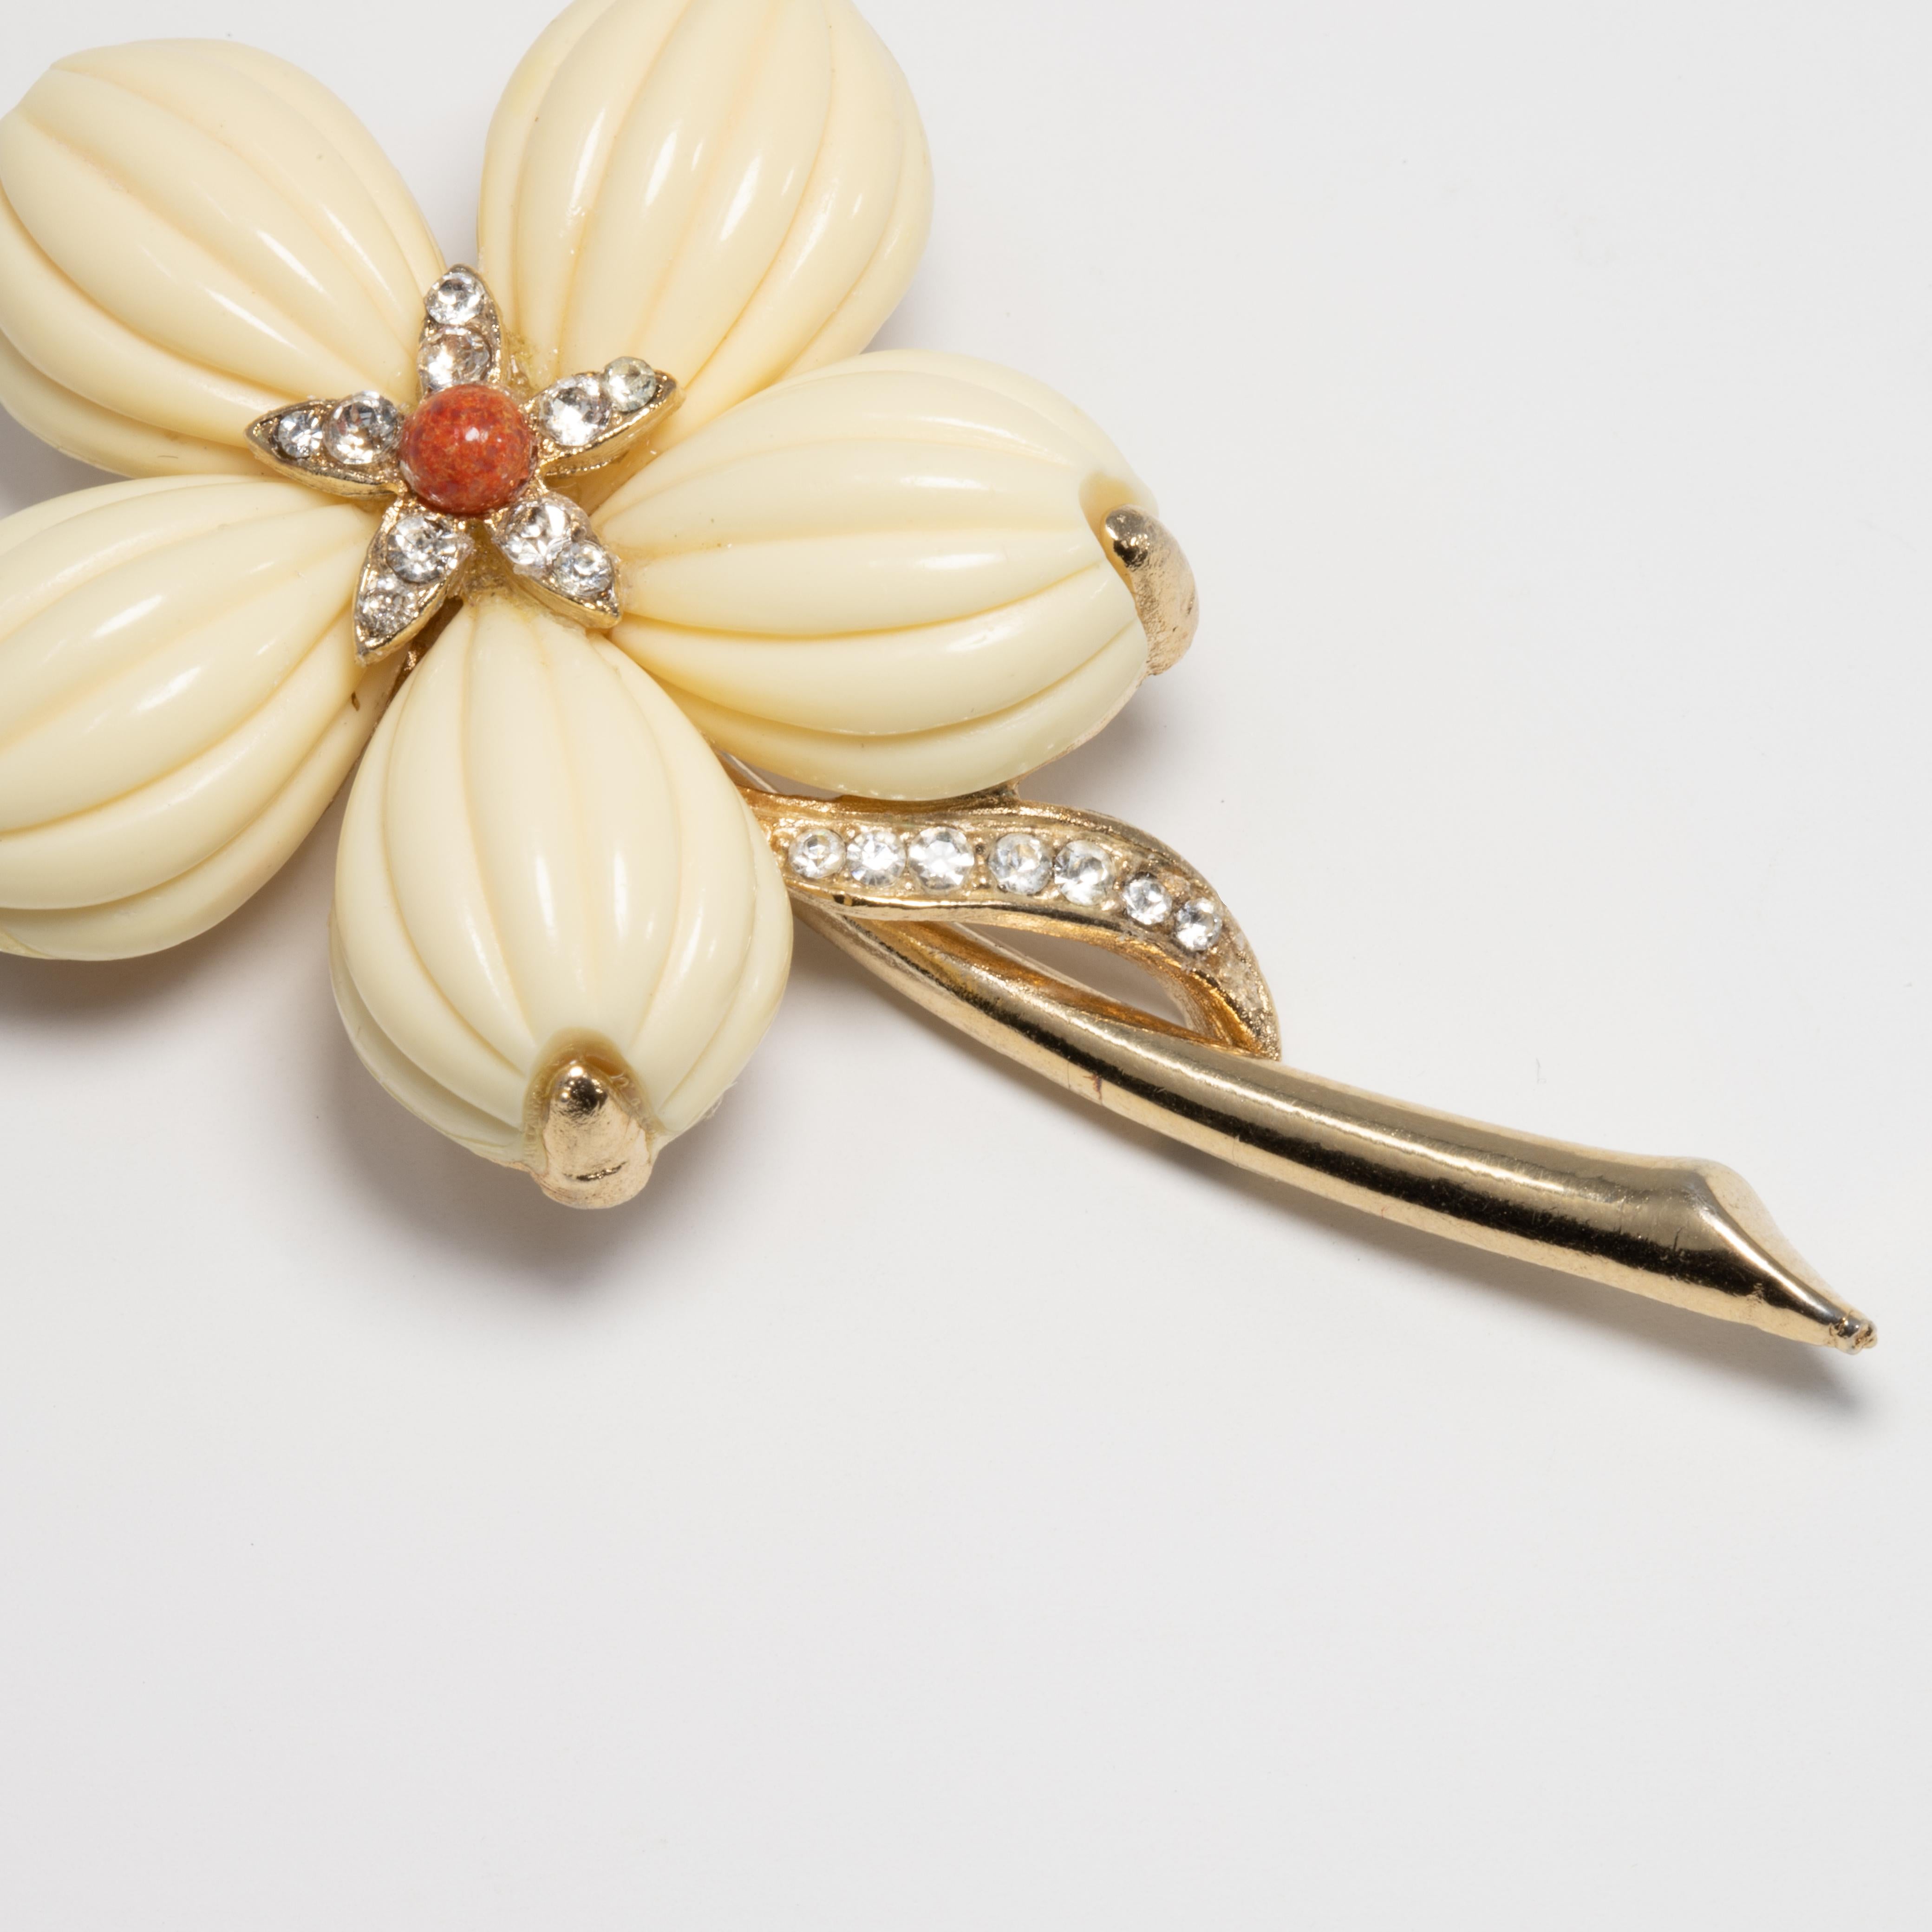 A classy Trifari brooch/pin. This pretty flower features cream-colored carved lucite petals prong set in the signature Trifari textured gold filled metal setting. The flower is also accented with clear crystals and a single faux coral